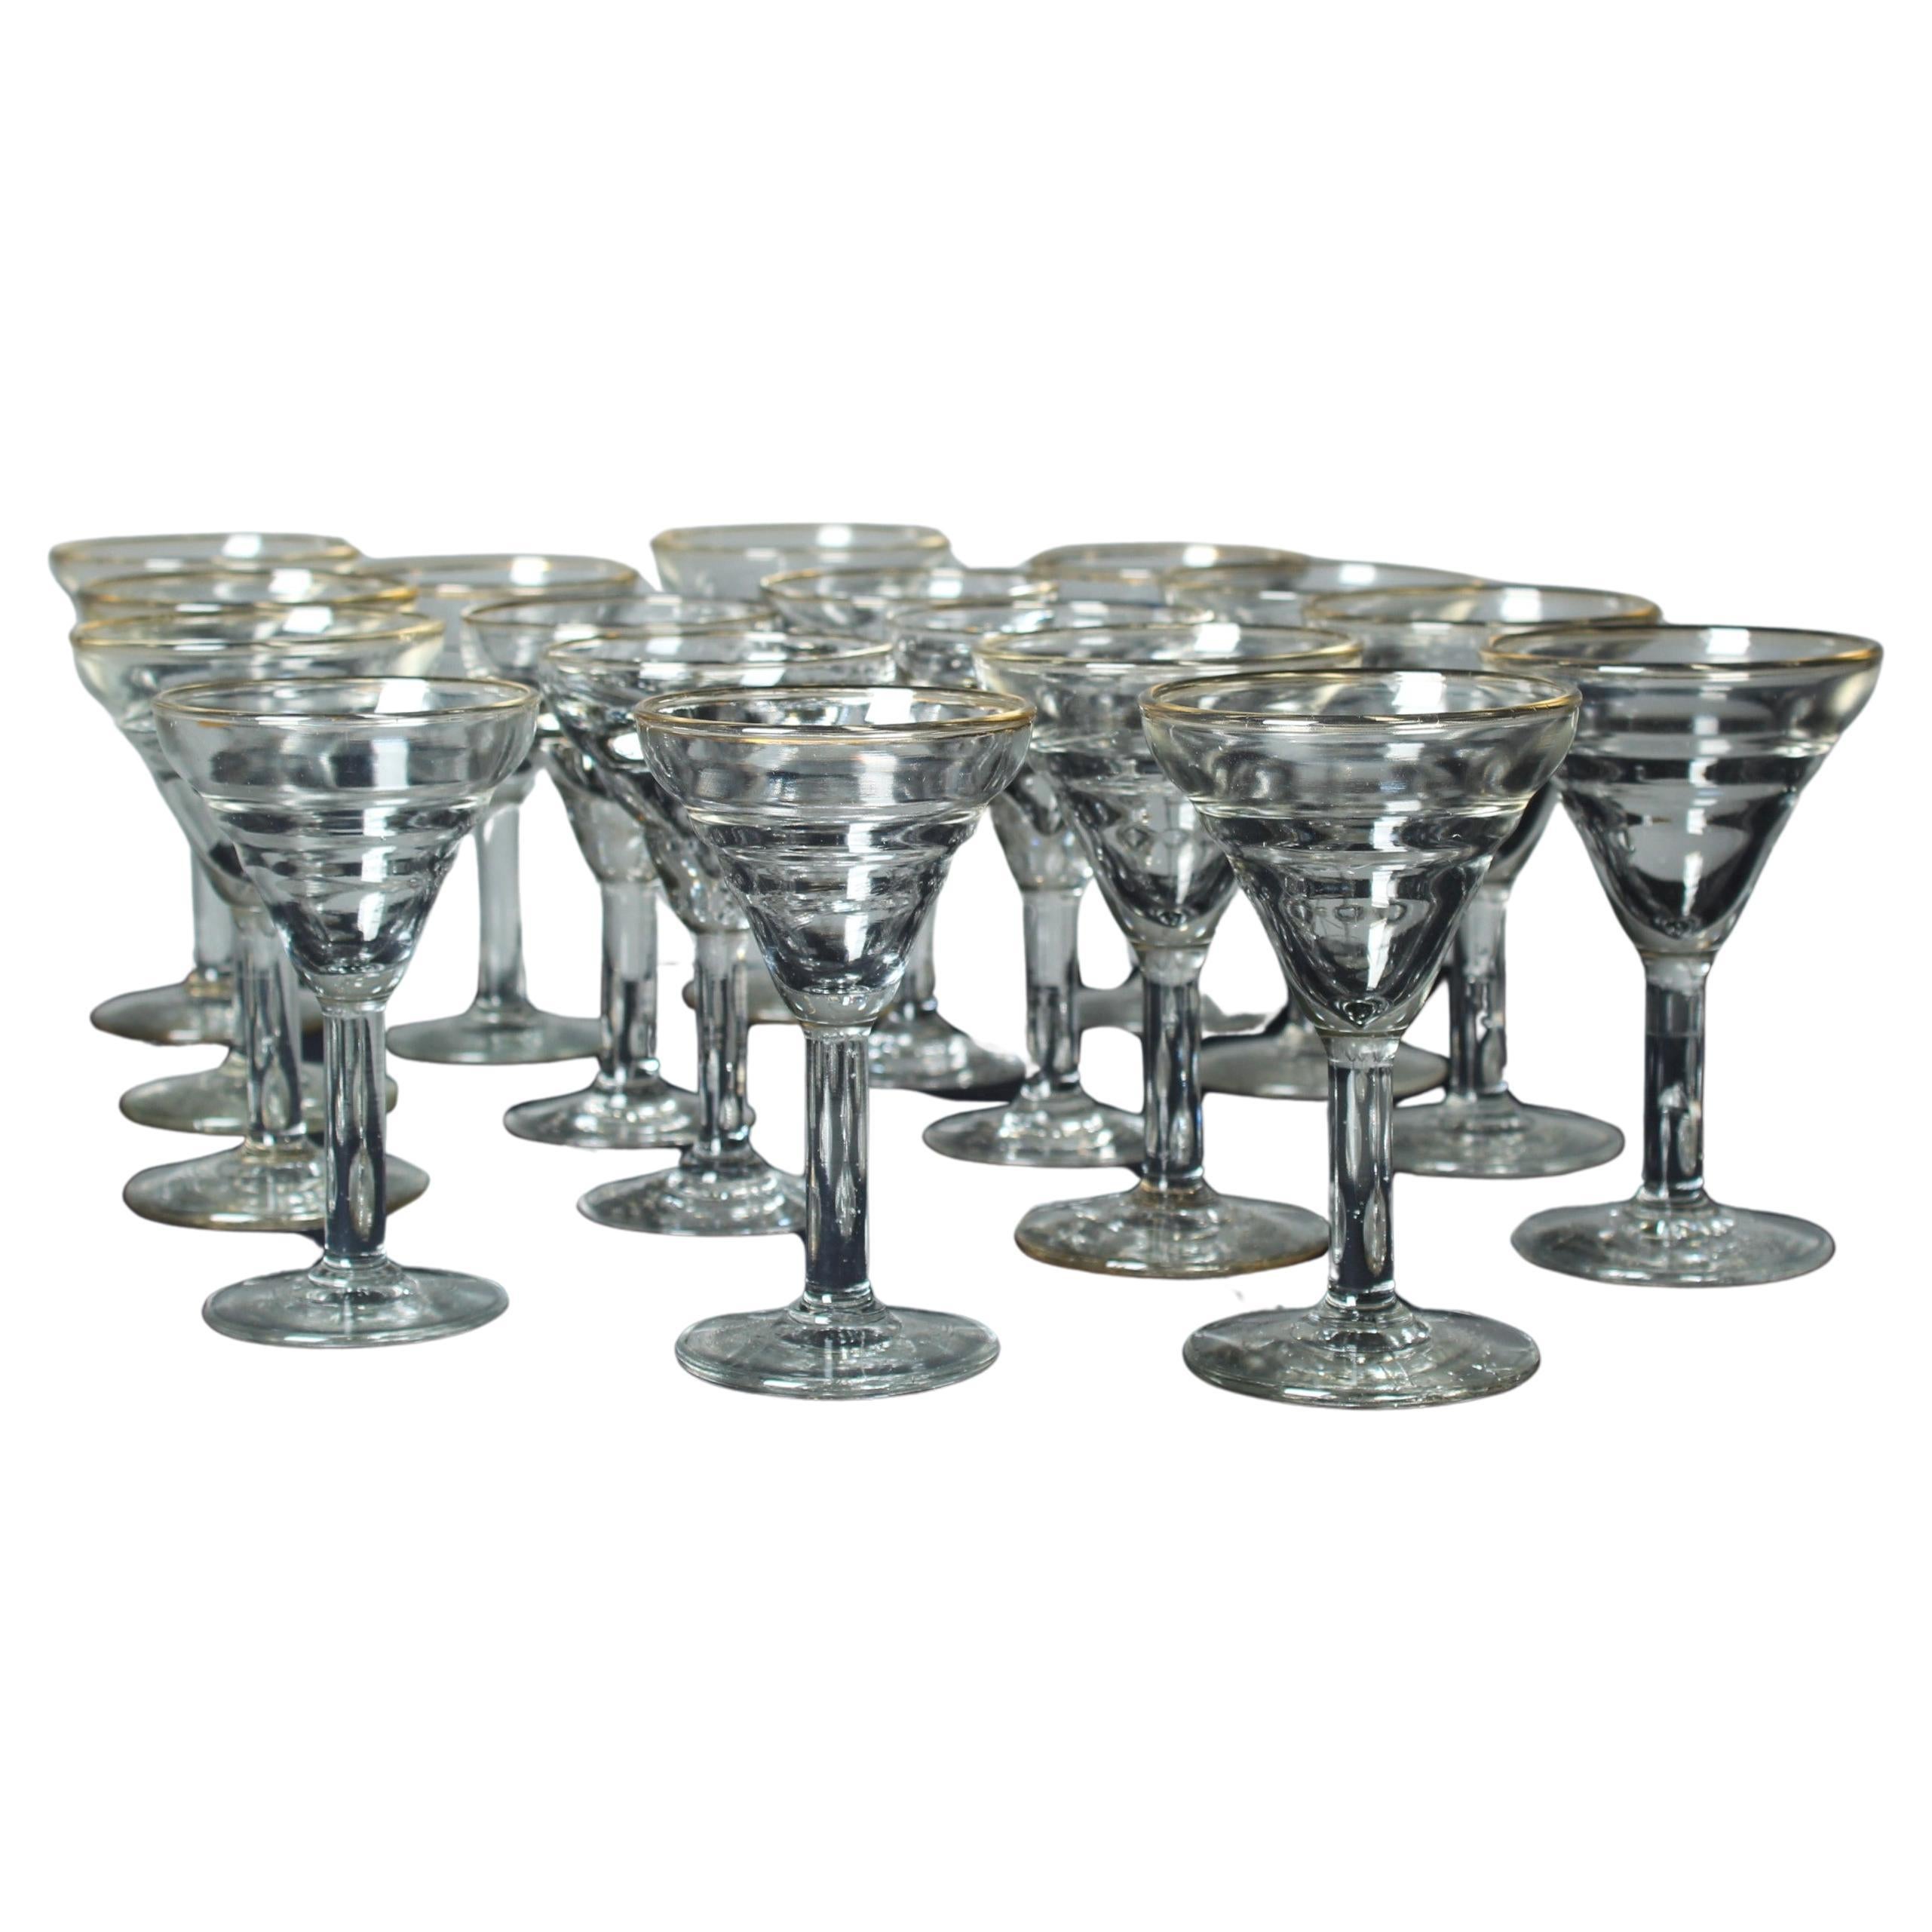 A beautiful set of seventeen aperitif or so-called bistrot glasses with golden details.
All unique and mouth-blown.

At the turn of the 20th century, the French culture of fine dining and socialising flourished, leading to the emergence of a symbol